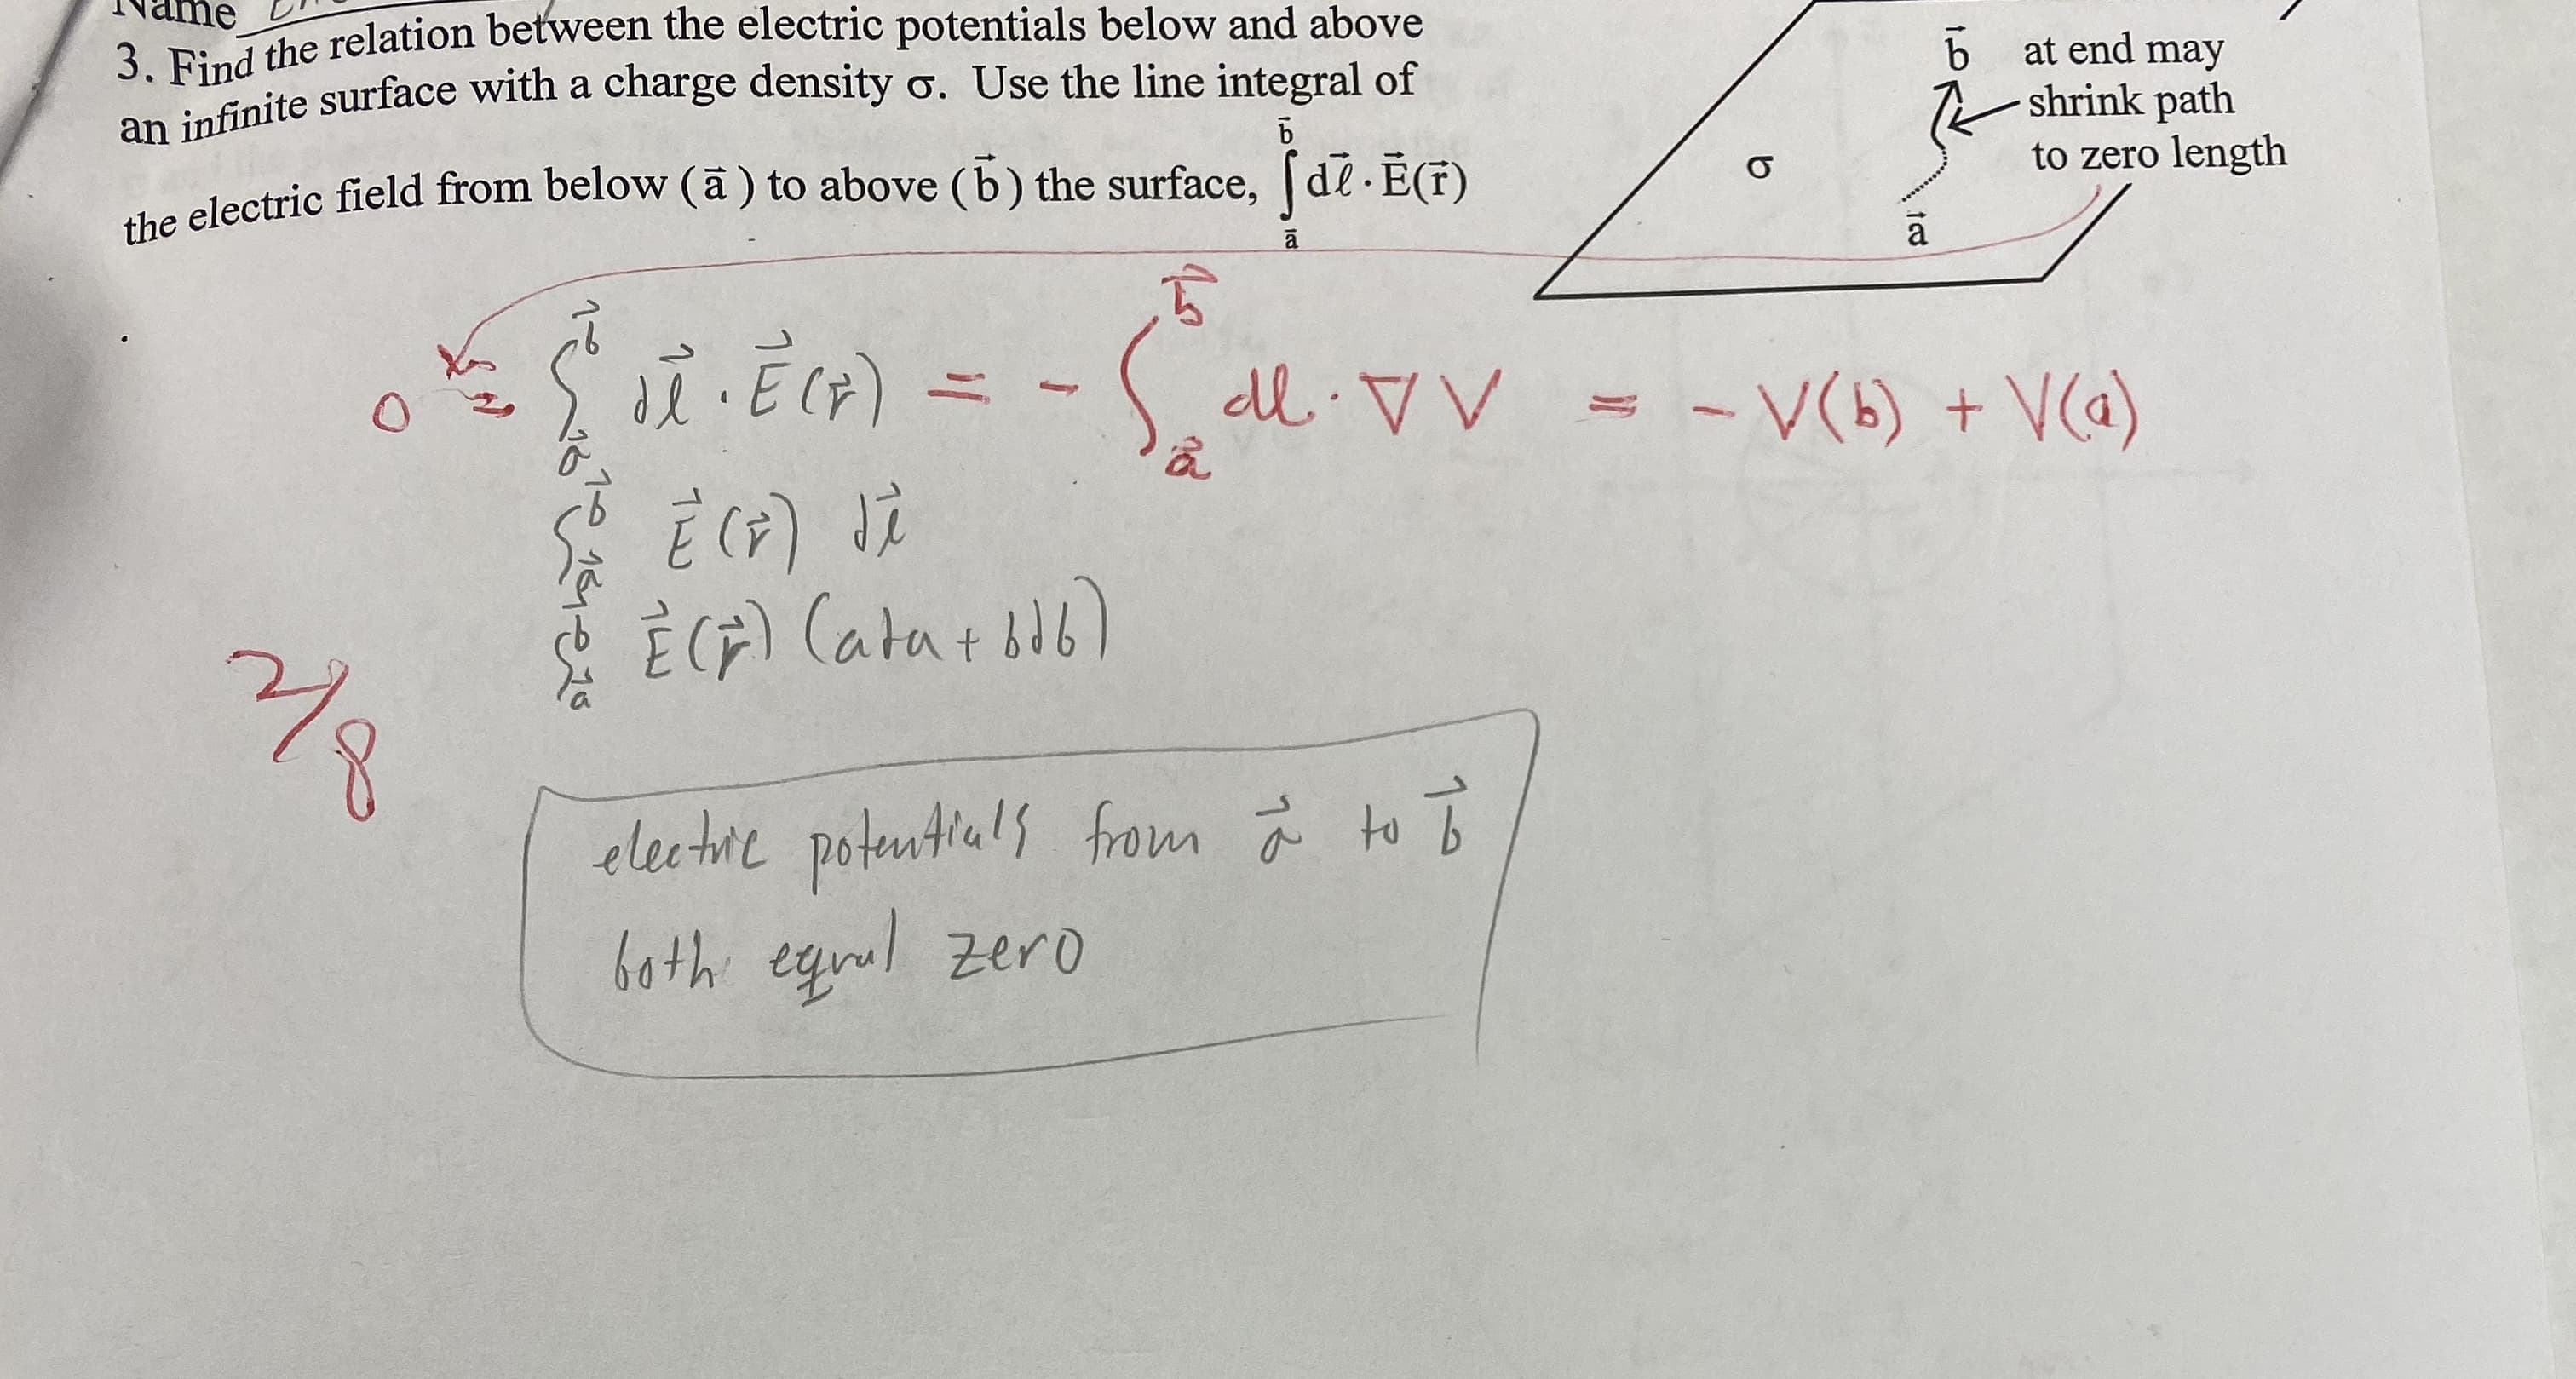 ame
3
dthe relation between the electric potentials below and above
an infinite surface with a charge density o. Use the line integral of
electric field from below (ā ) to above (b) the surface, de.E(T)
at end may
shrink path
to zero length
- V(5) + V@)
È (F) Catatil6)
electire potentlials from ä to o
both egrul zero
